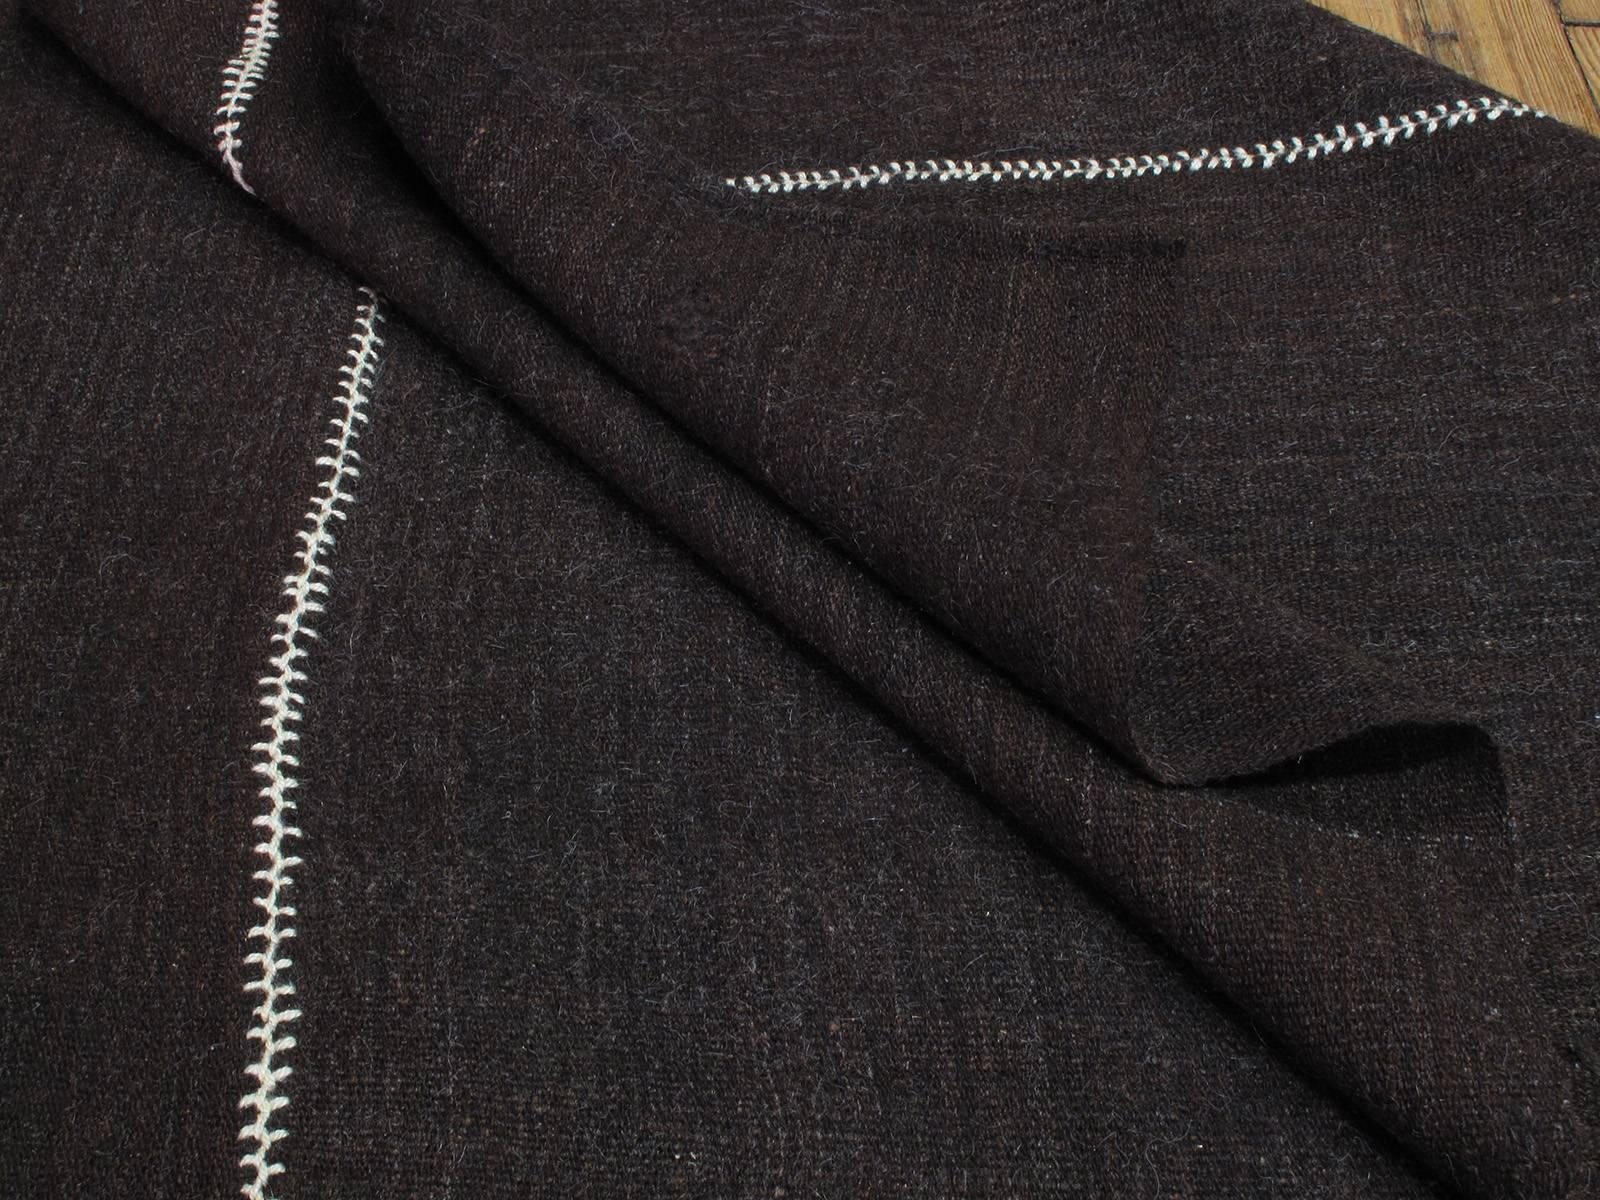 Hand-Woven Brown-Black Cover in Four Panels